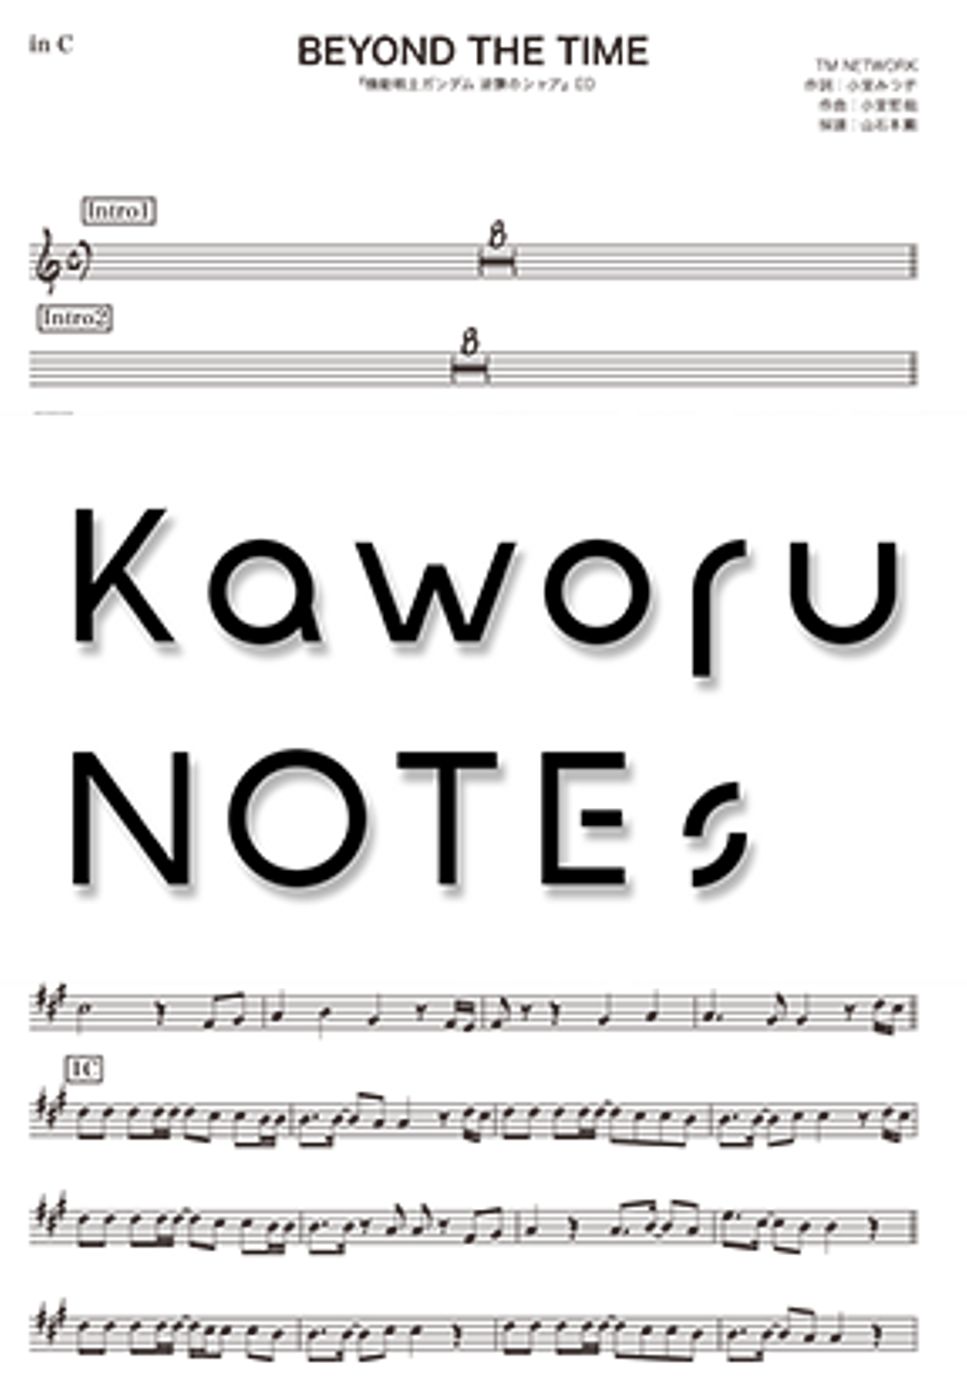 TM NETWORK - BEYOND THE TIME（in C/Mobile Suit Gundam Char's Counterattack） by Kaworu NOTEs